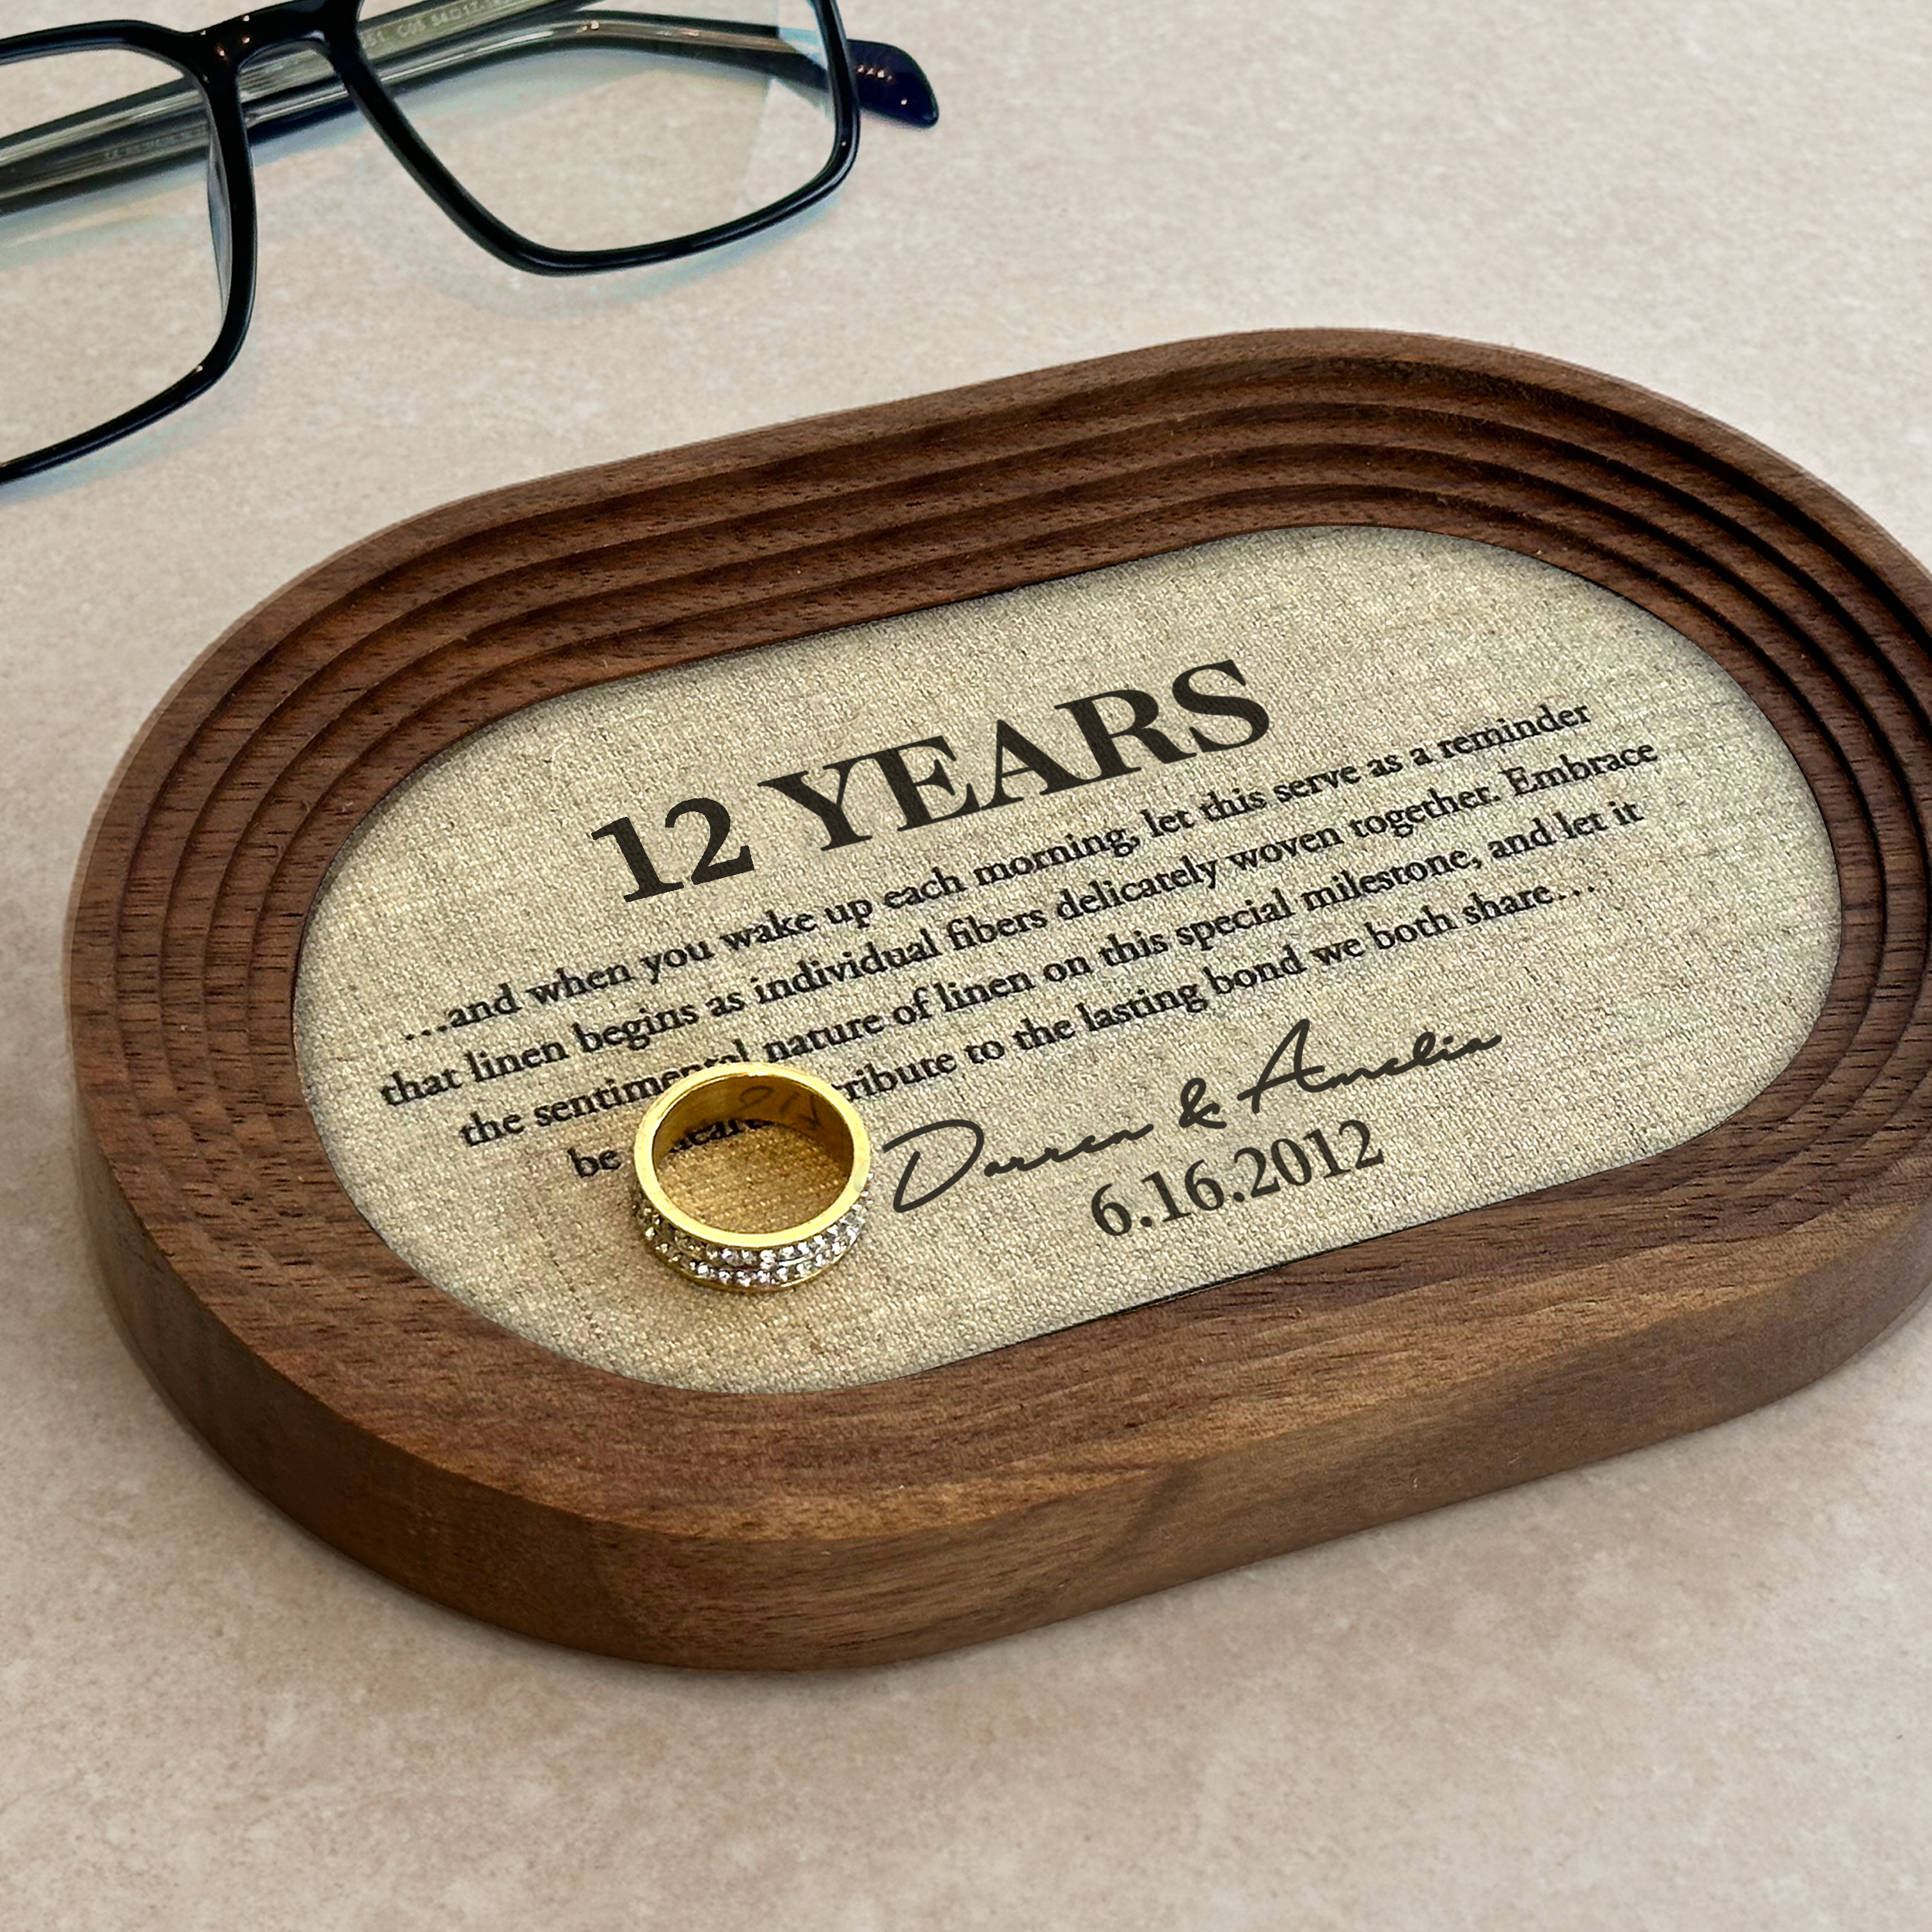 Customizable catchall tray with linen for 12 year anniversary celebration